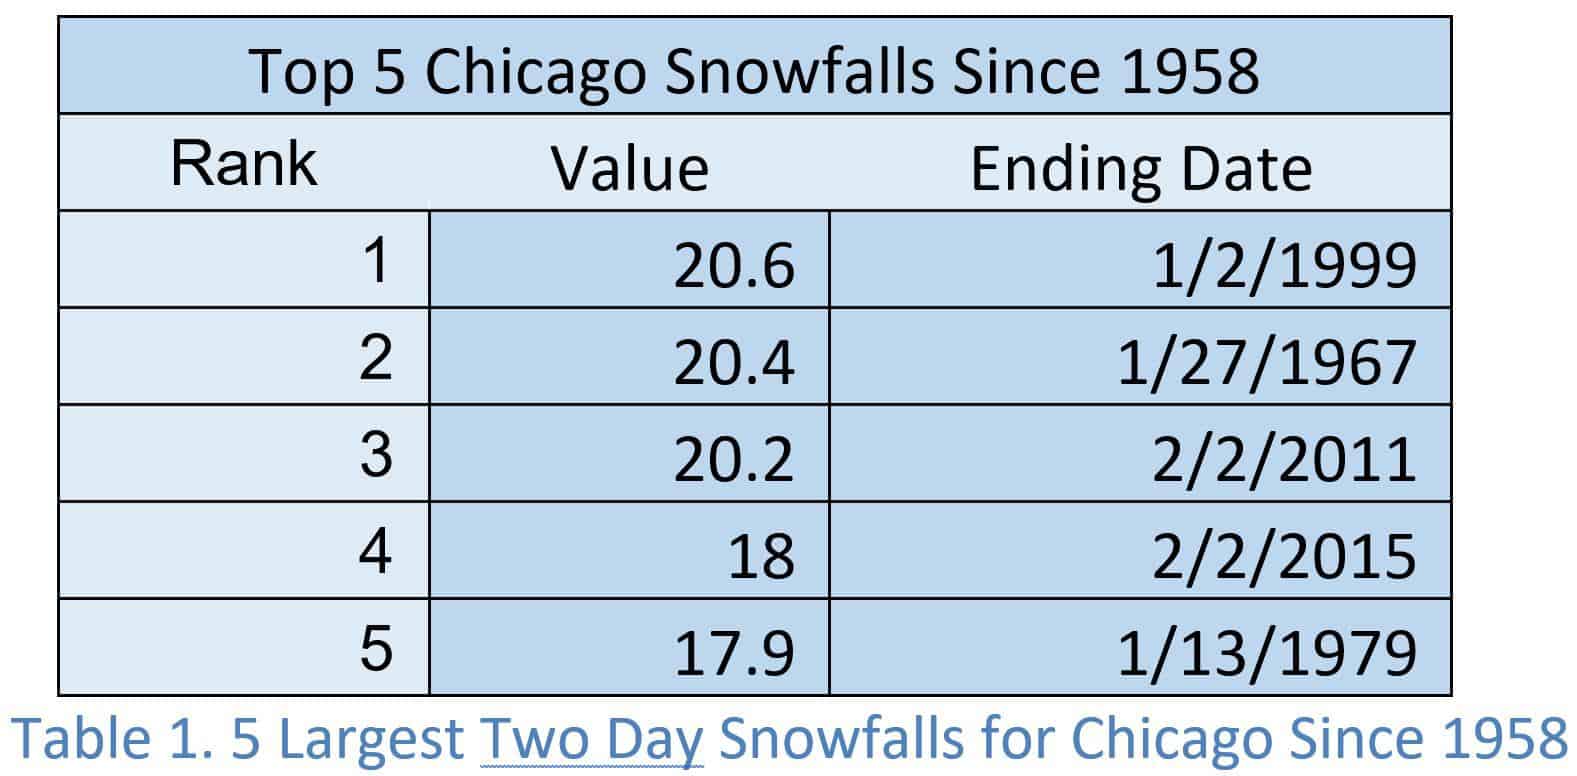 Top 5 Two Day Snowstorms Series: Chicago